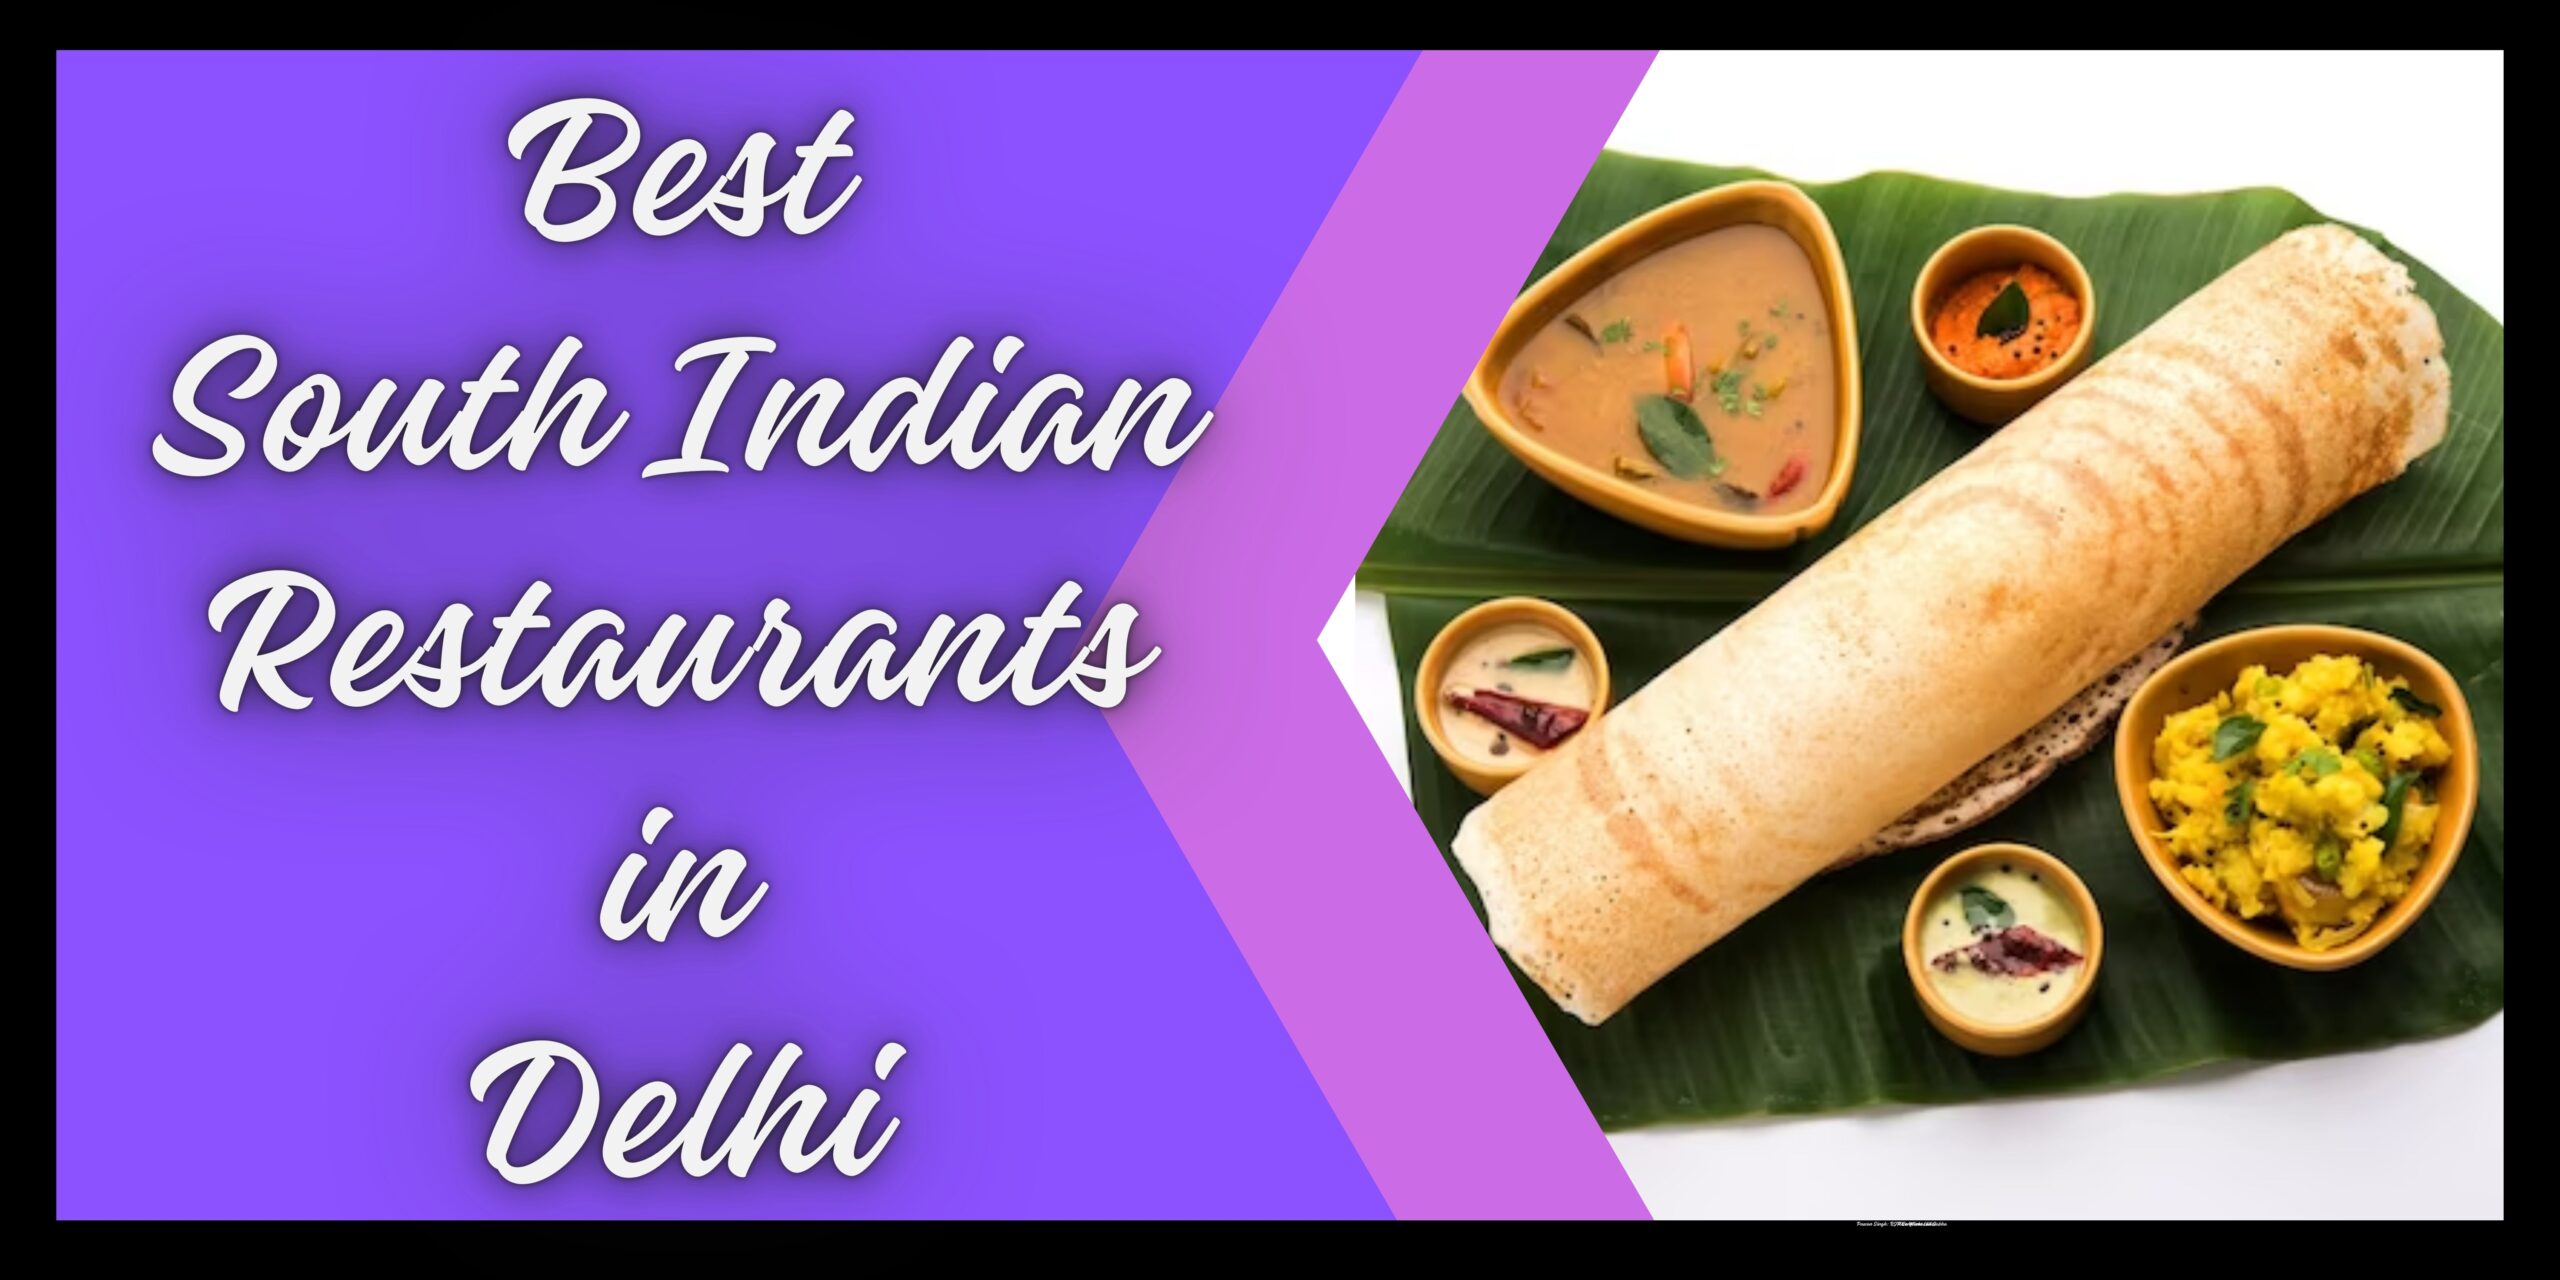 14 Best South Indian Restaurants in Delhi – Authentic South Indian Cuisine